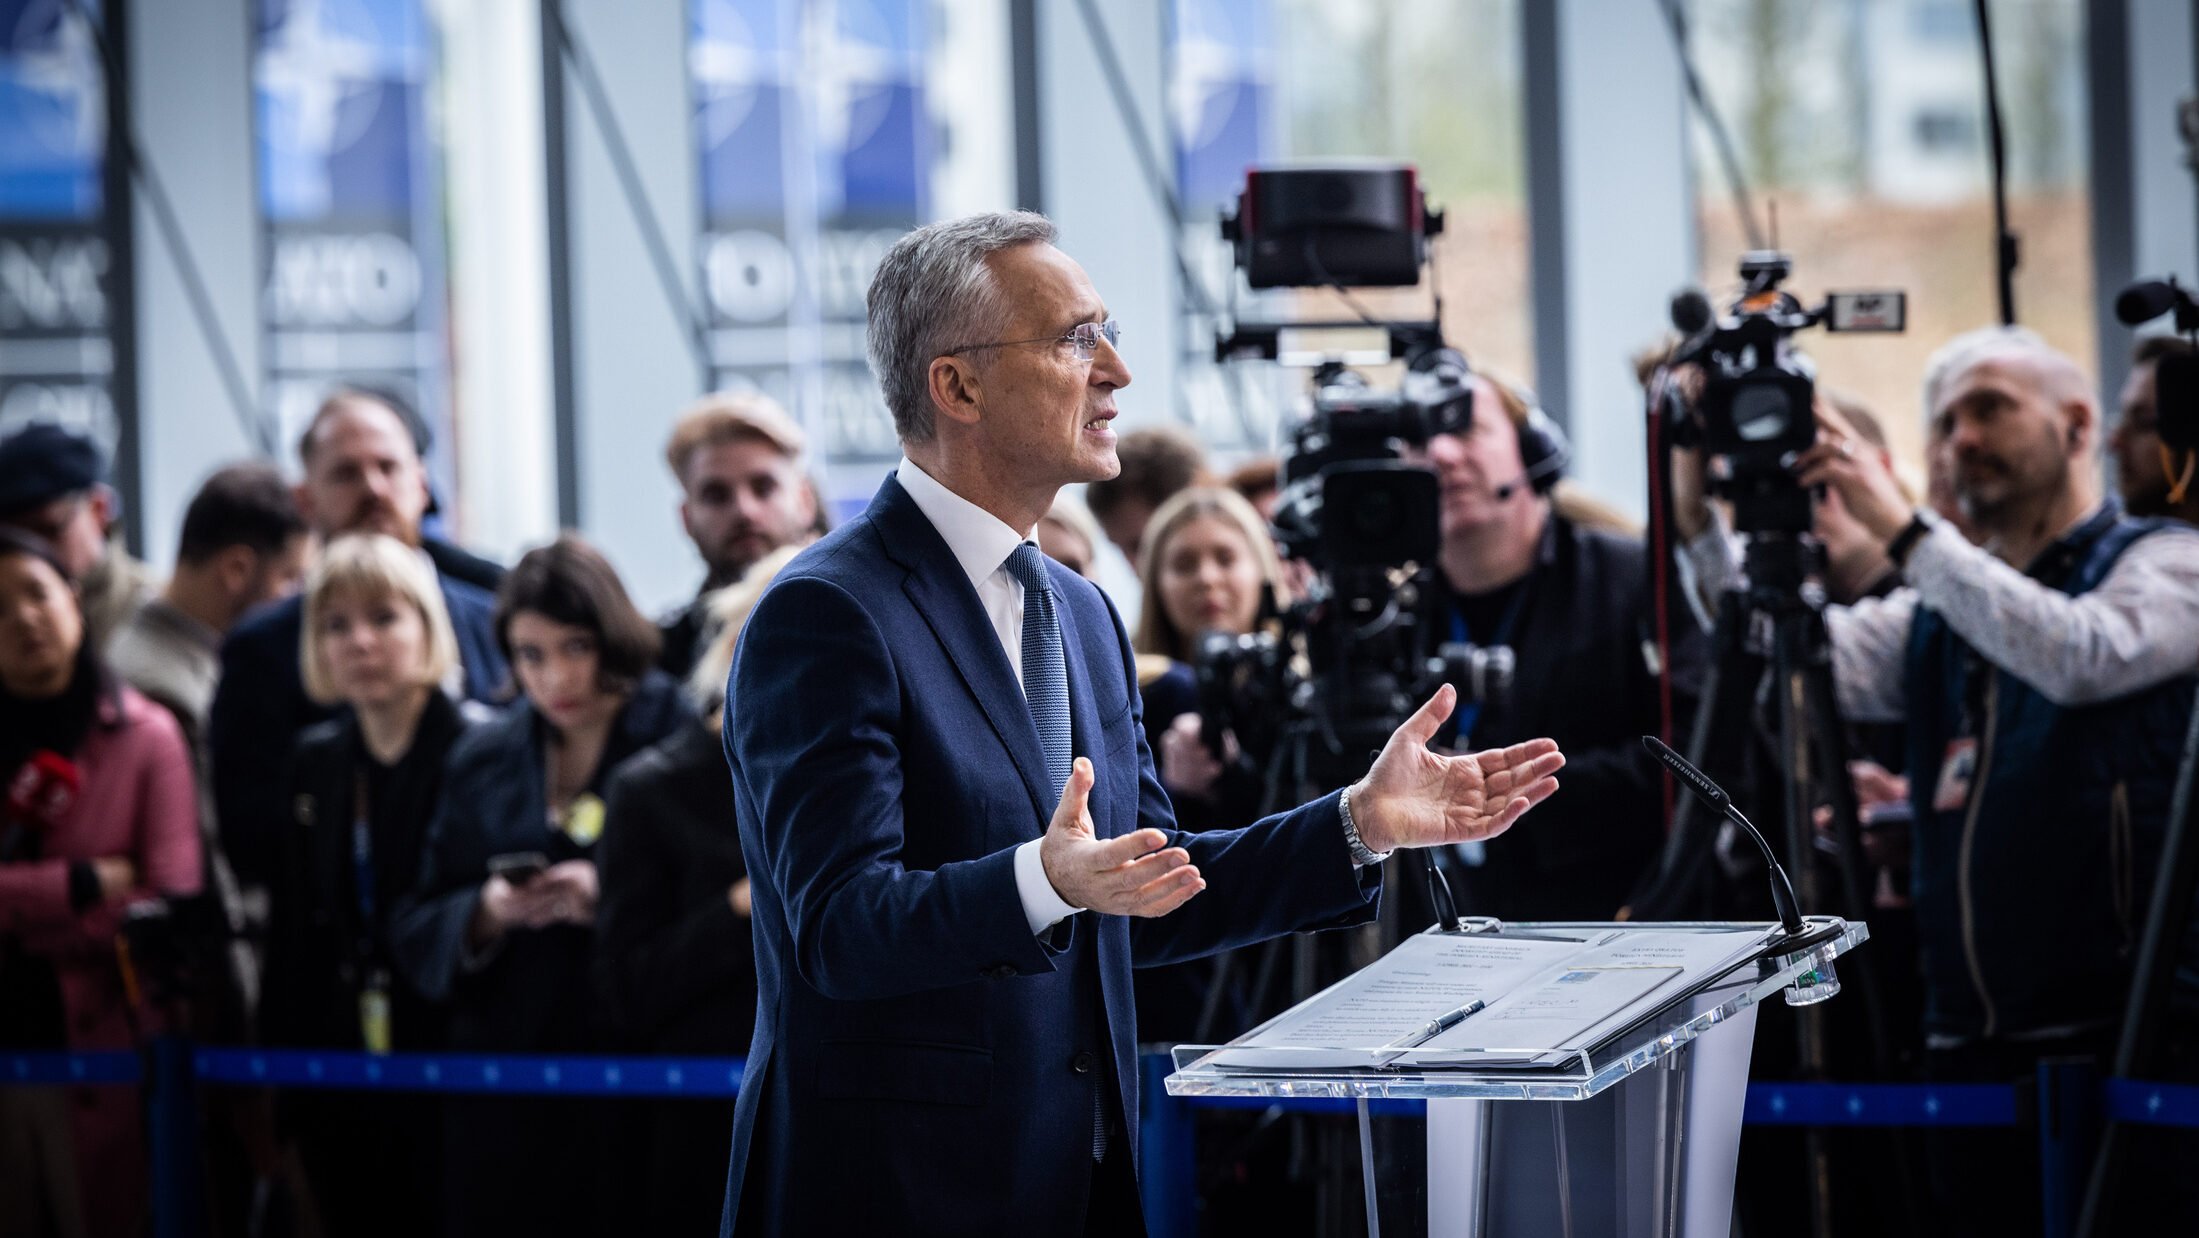 Doorstep statement by the NATO Secretary General – Meeting of NATO Ministers of Foreign Affairs